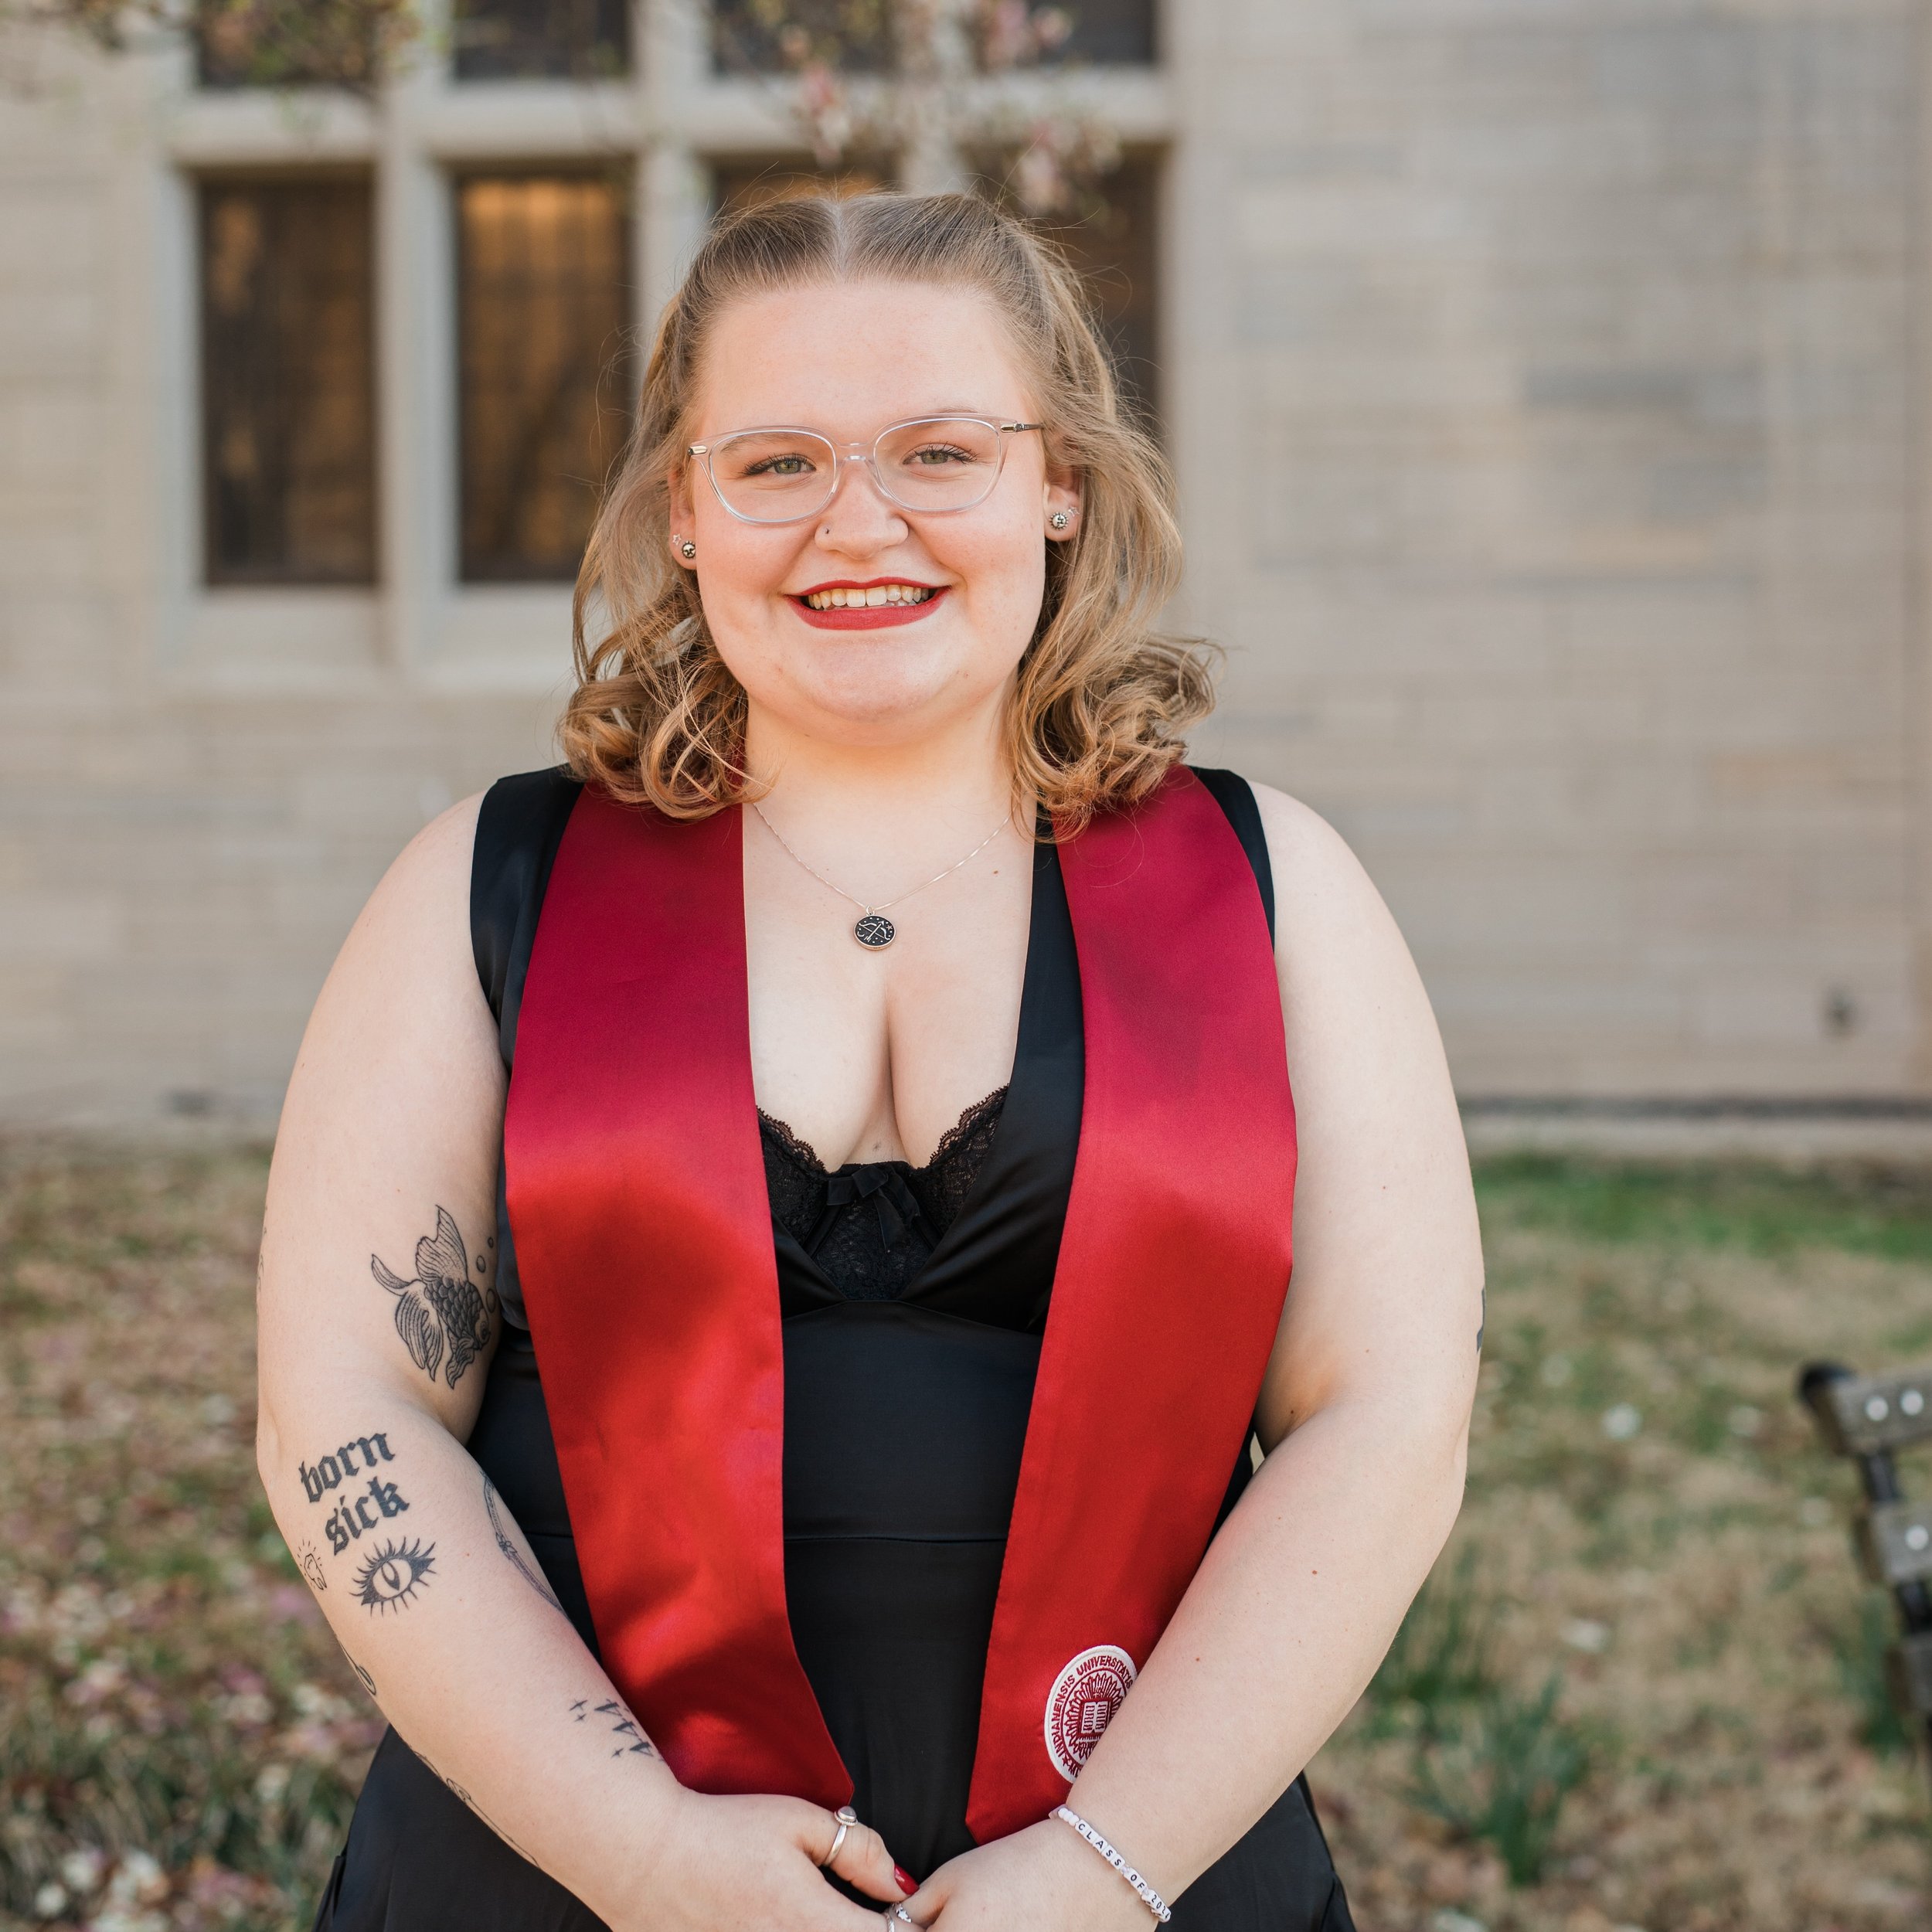 Please join me today in congratulating my incredible campaign manager @mia_seifers_ as she graduates from Indiana University with a dual degree in philosophy and political science! She&rsquo;s smart, passionate, dedicated, and I&rsquo;m lucky to have